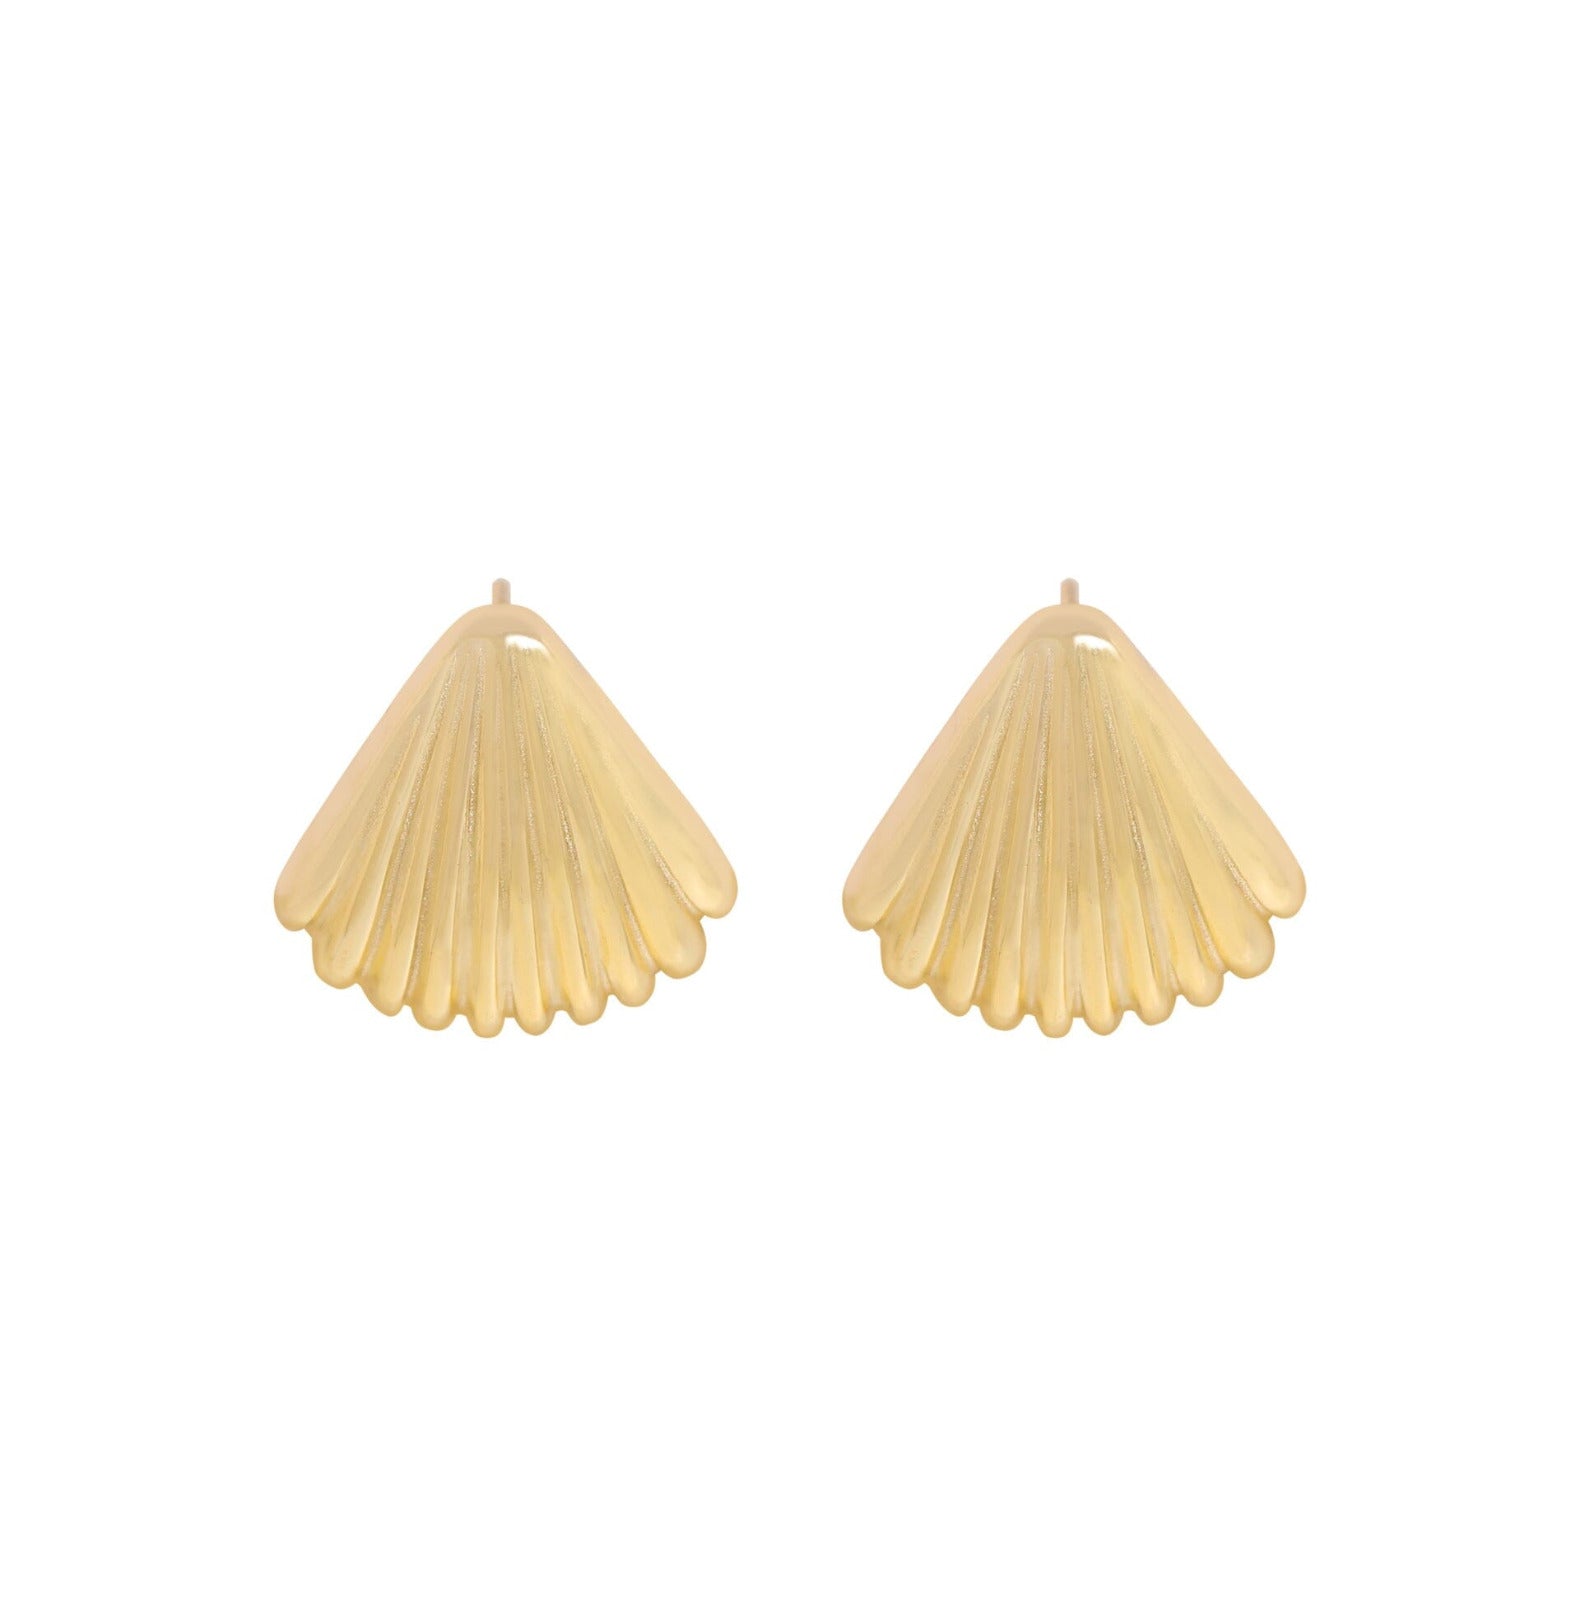 OCEAN SHELL DROP EARRING braclet Yubama Jewelry Online Store - The Elegant Designs of Gold and Silver ! 